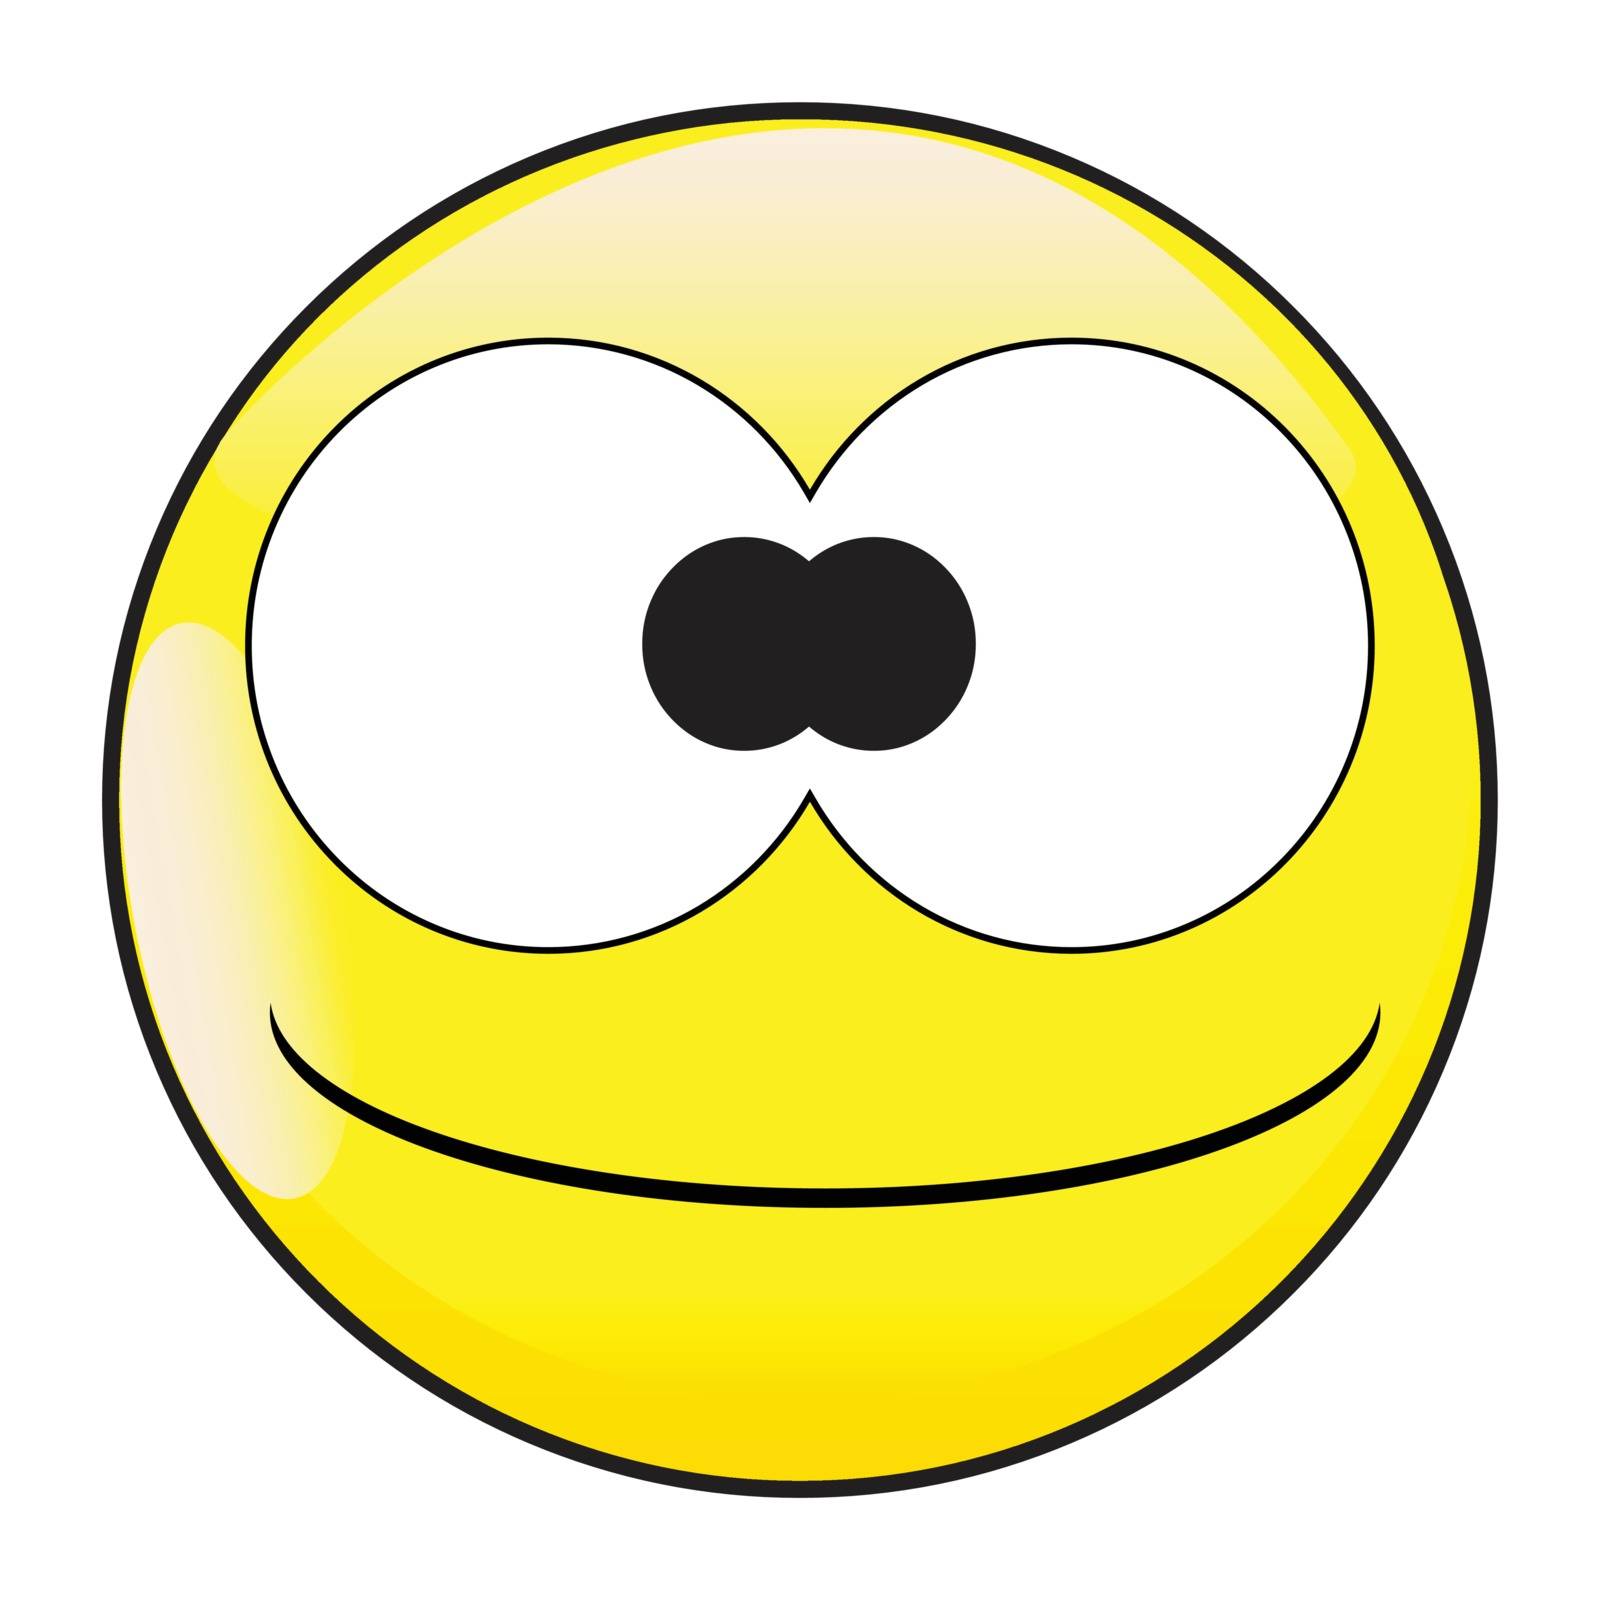 A big eyed happy silly and stupid smiling smile face button isolated on a white background